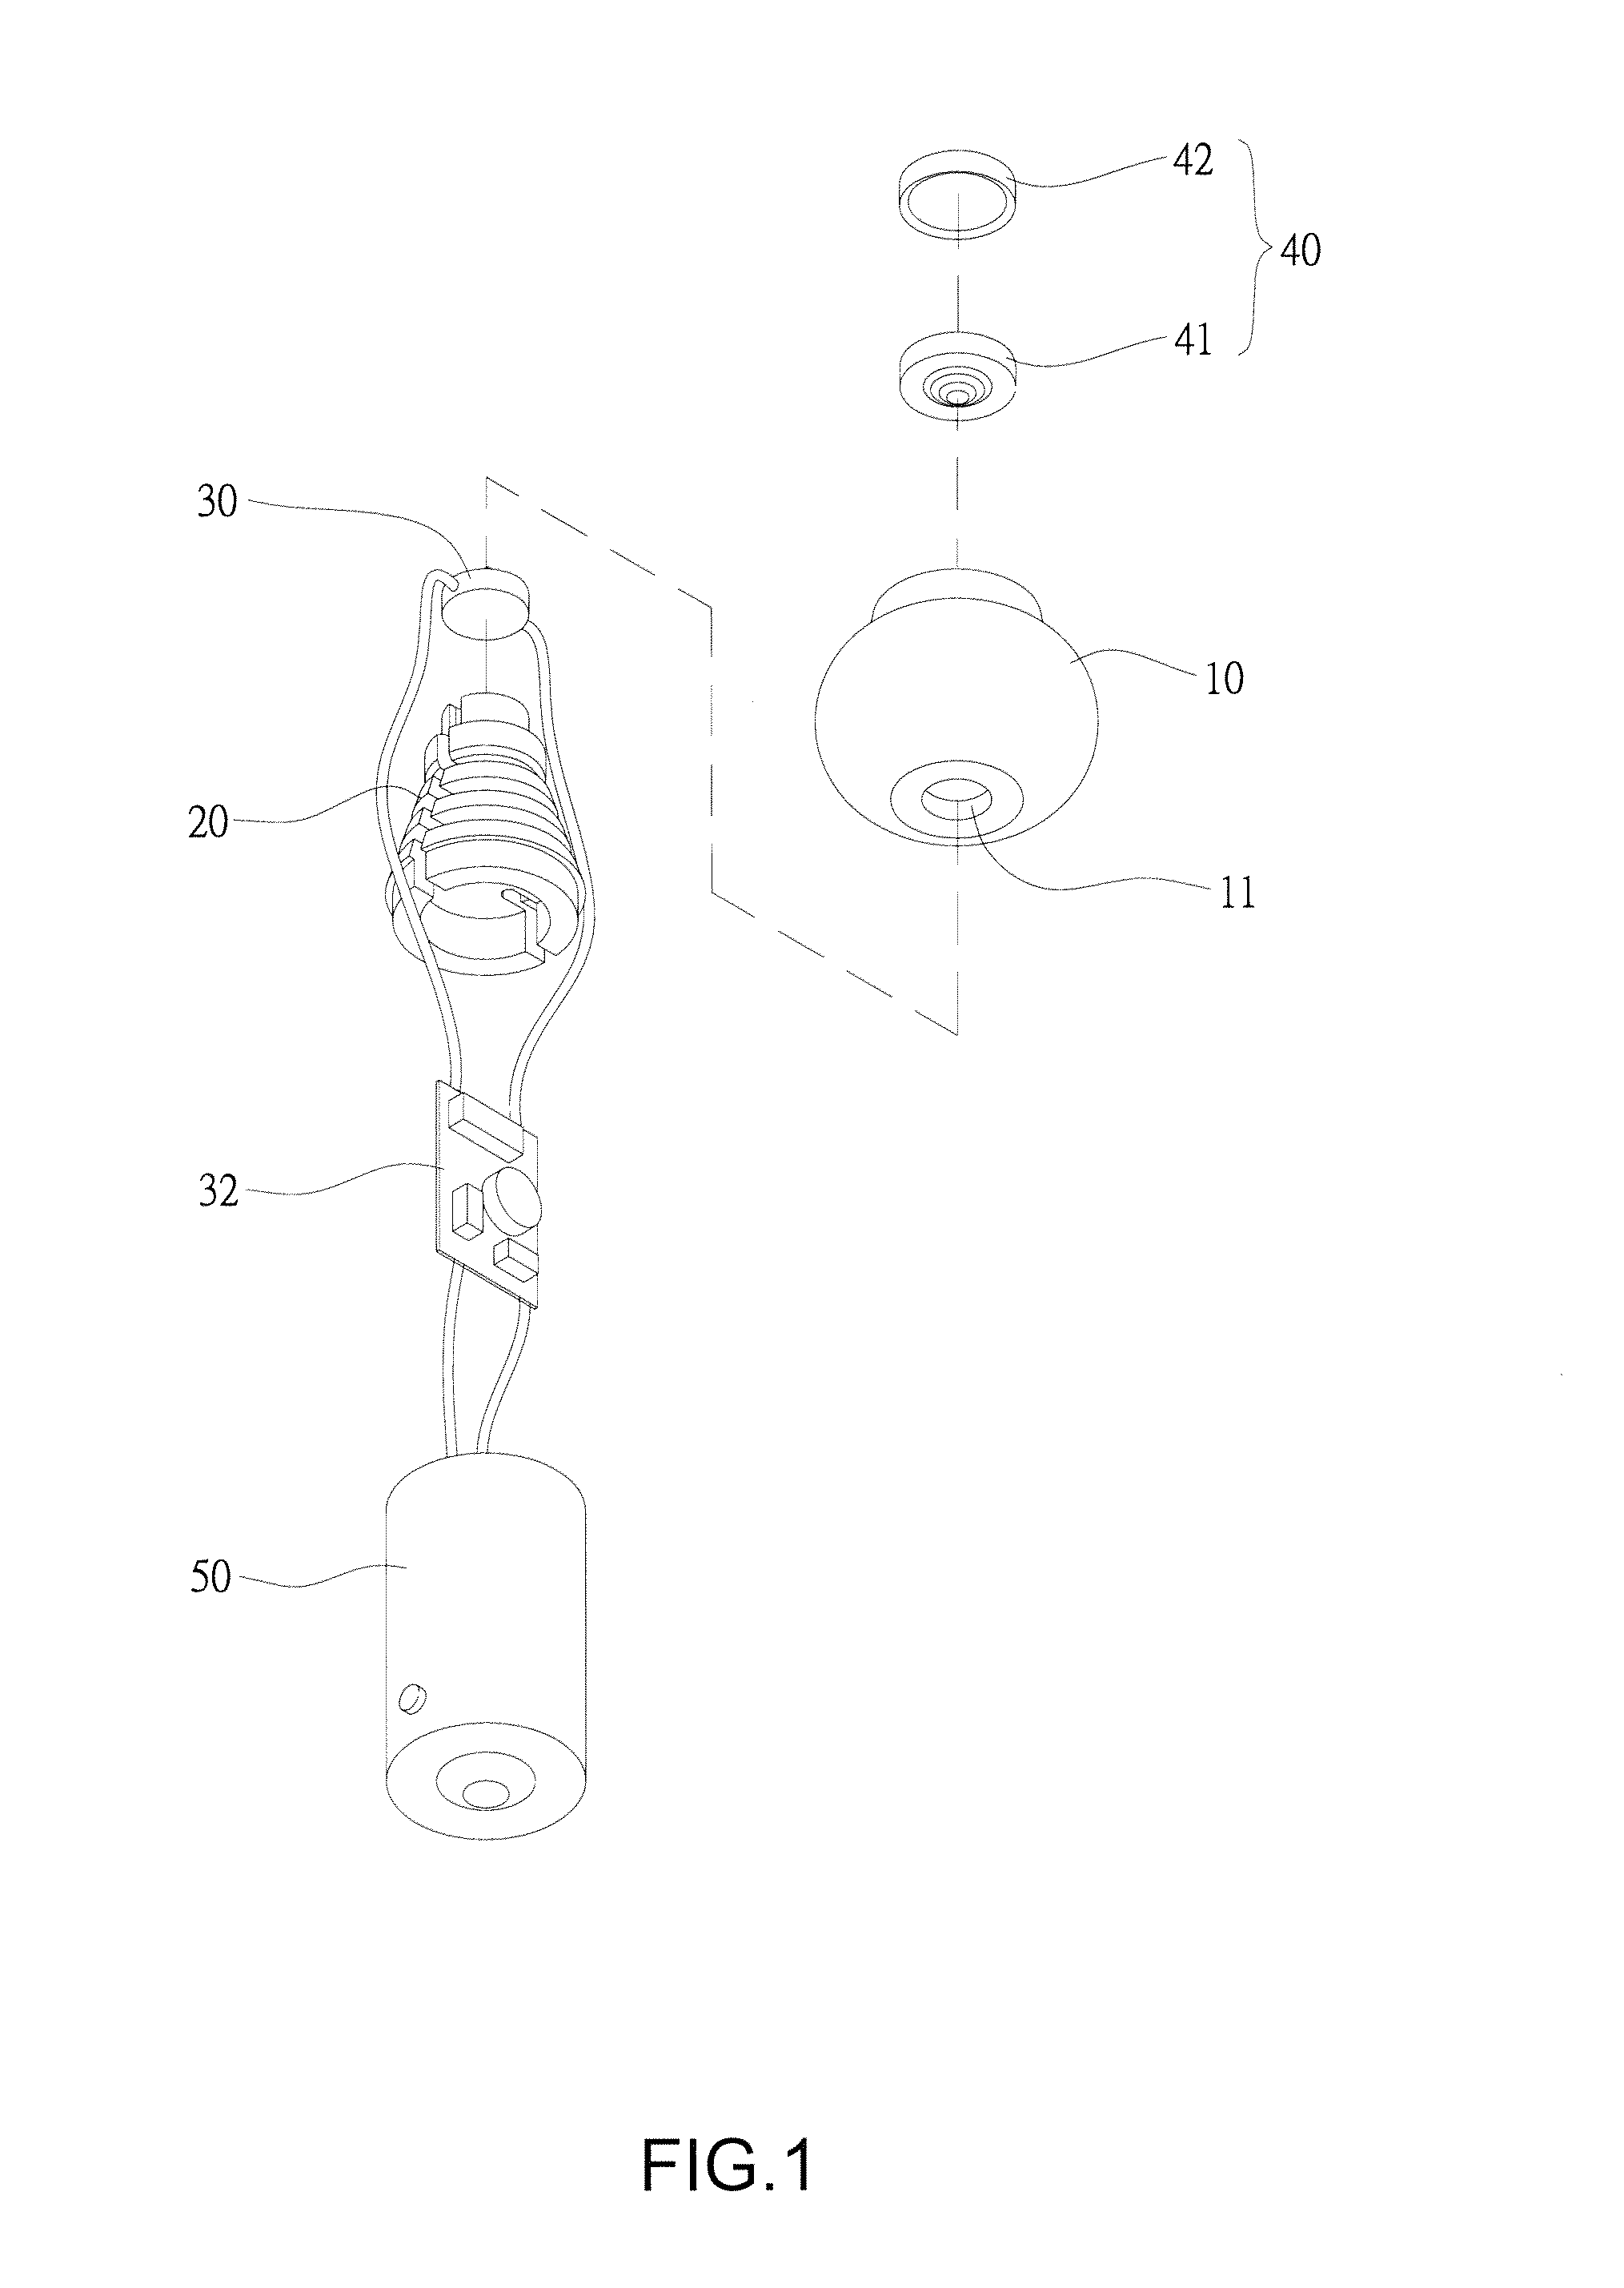 Tungsten-Filament-Like Light-Emitting Diode Lamp Structure